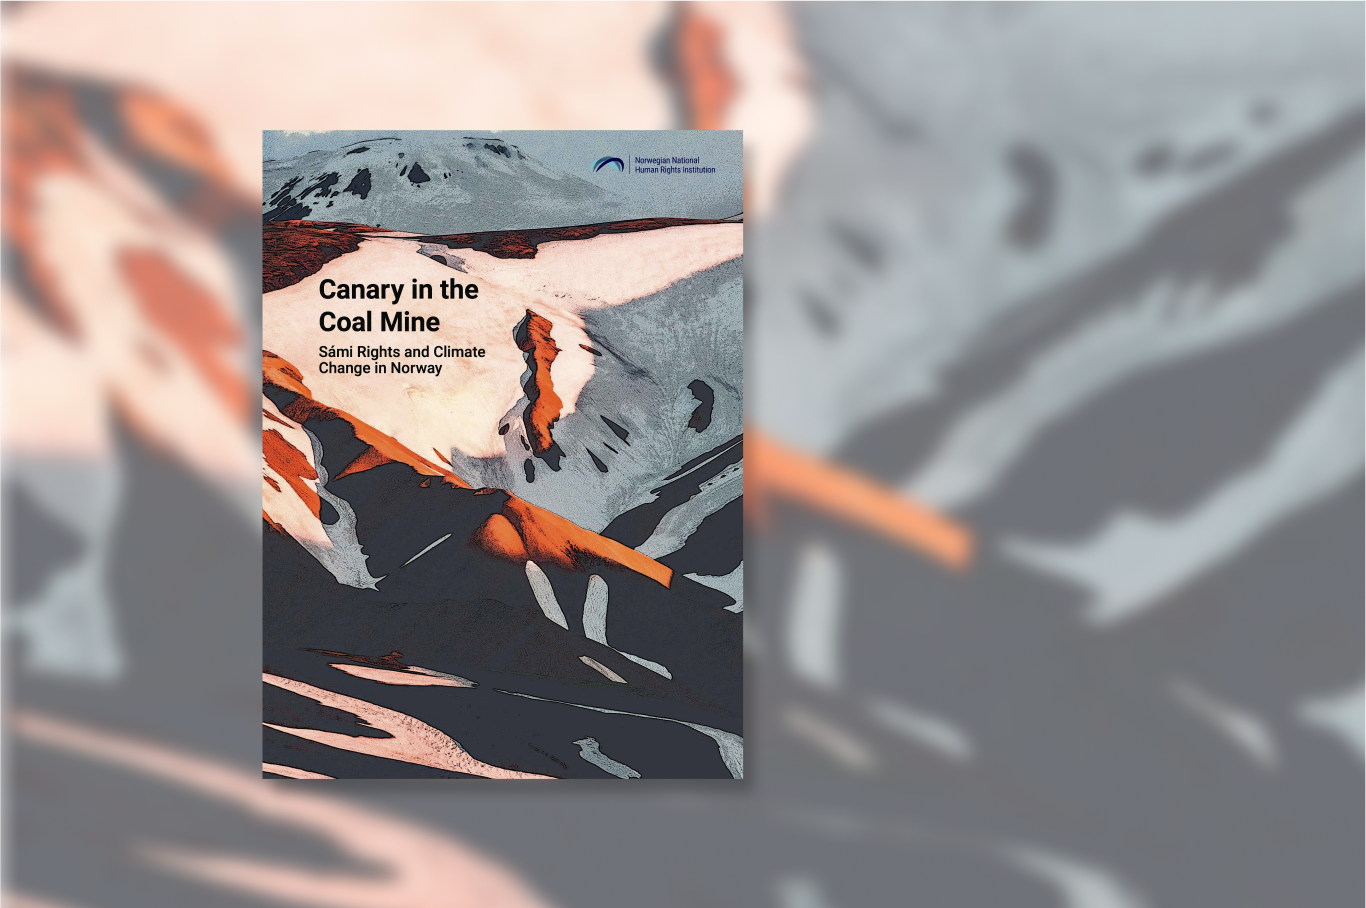 Front cover of the report: "Canary in the Coal Mine – Sámi Rights and Climate Change in Norway"